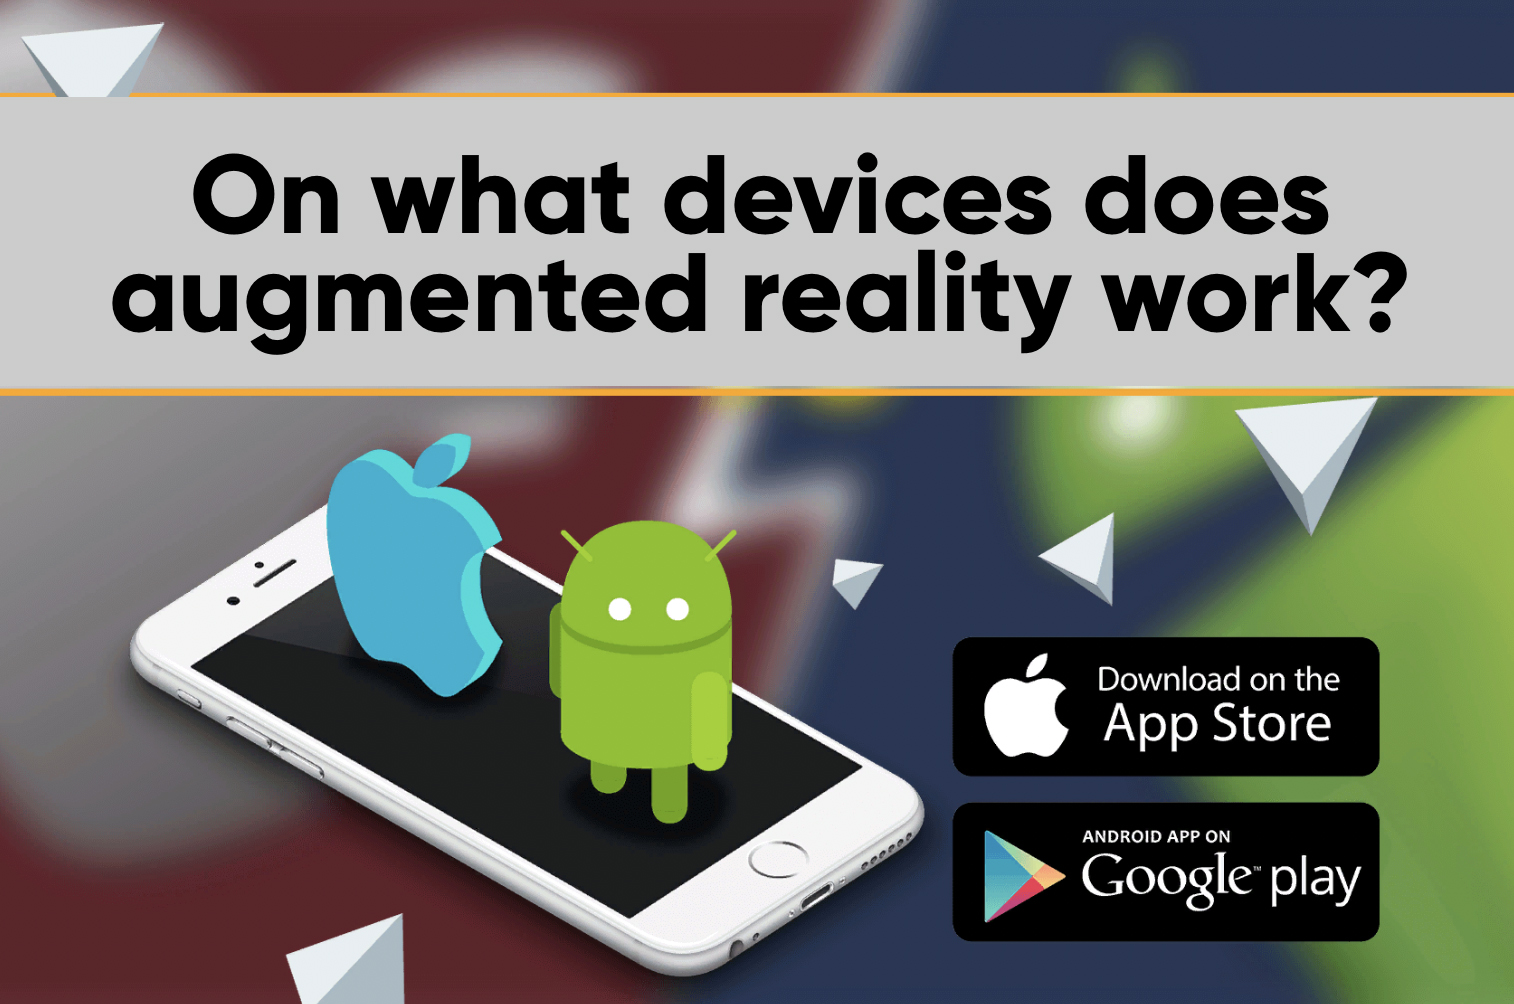 which devices does AR work